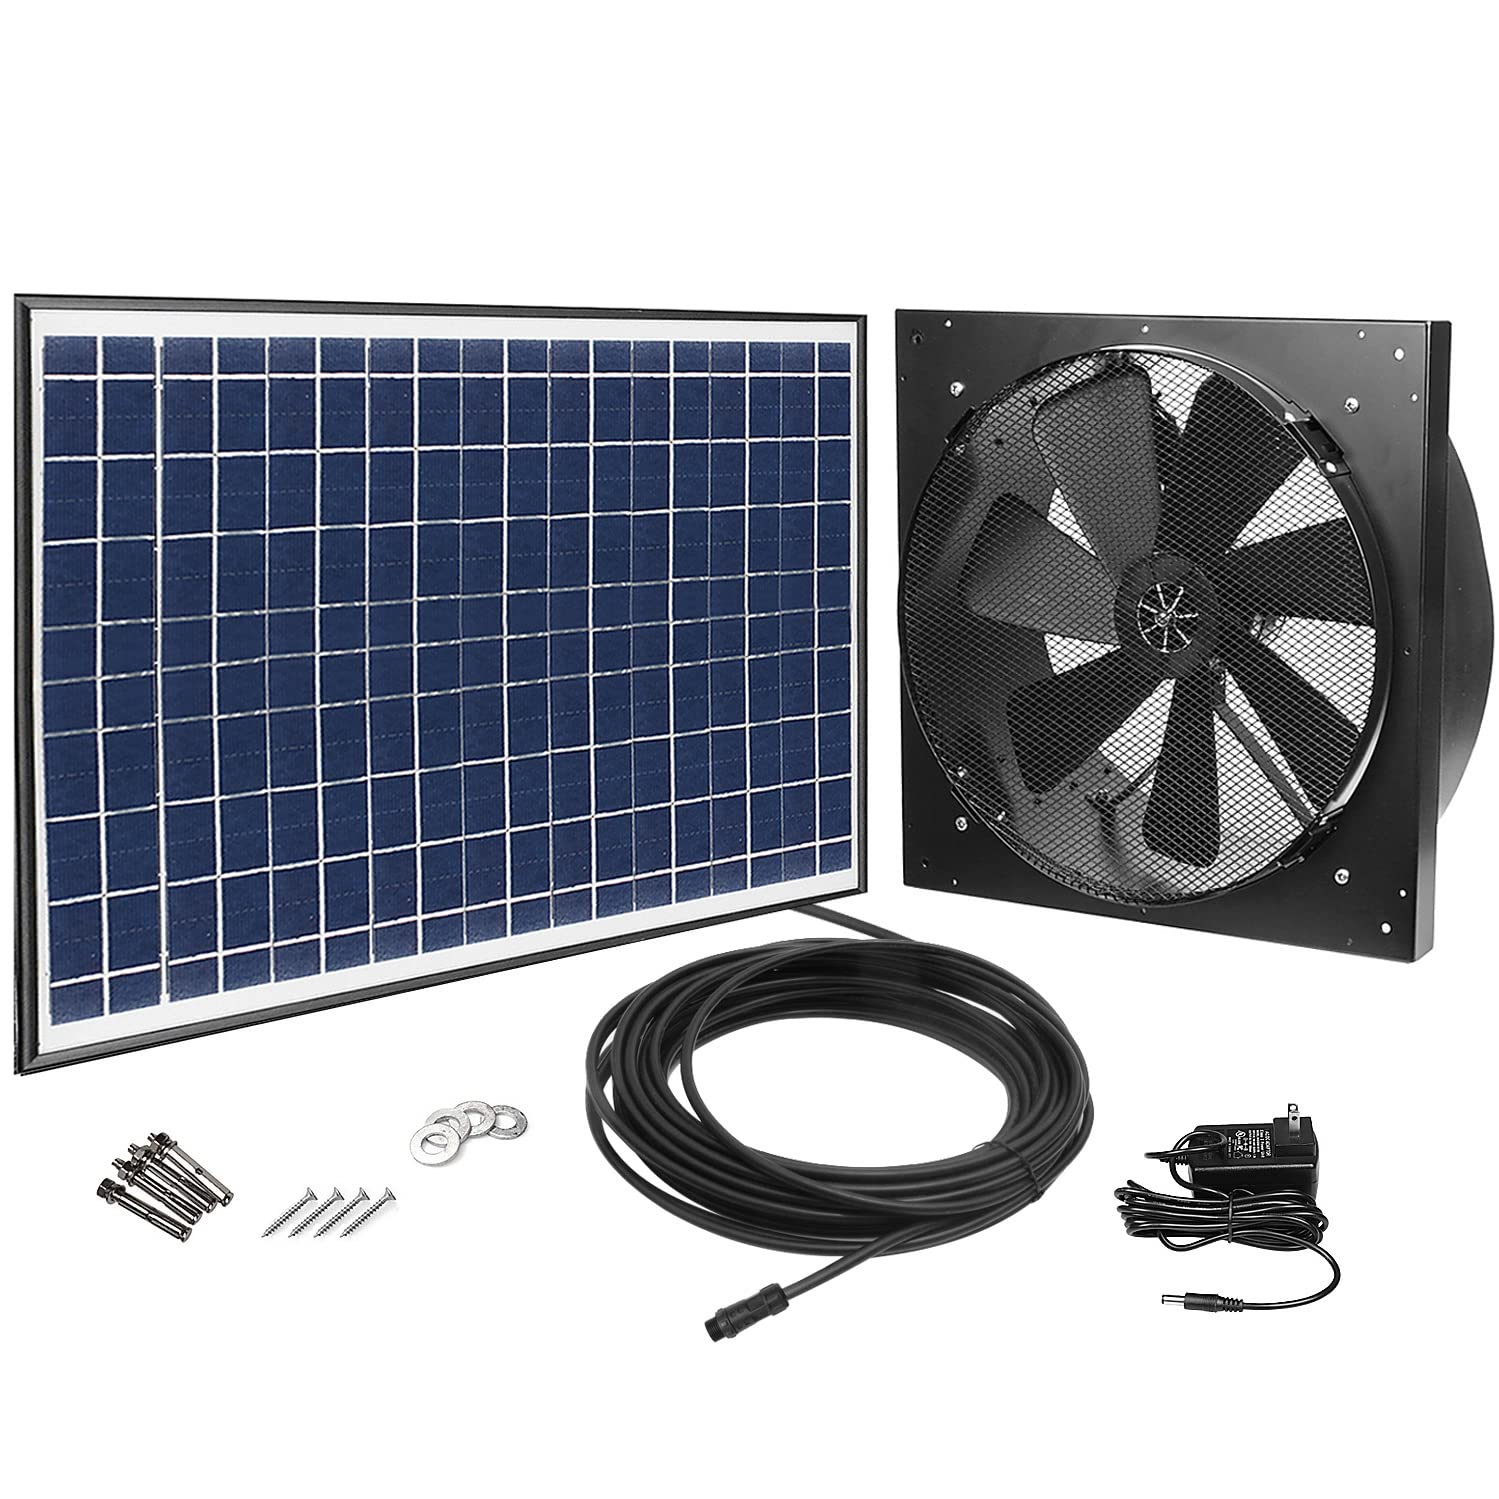 GBGS 30W Solar Powered Exhaust Fan AC Power Backup, Built-in Thermostat Switch, 1750CFM, 4200sq/ft Ventilation, IP68 Brushless D